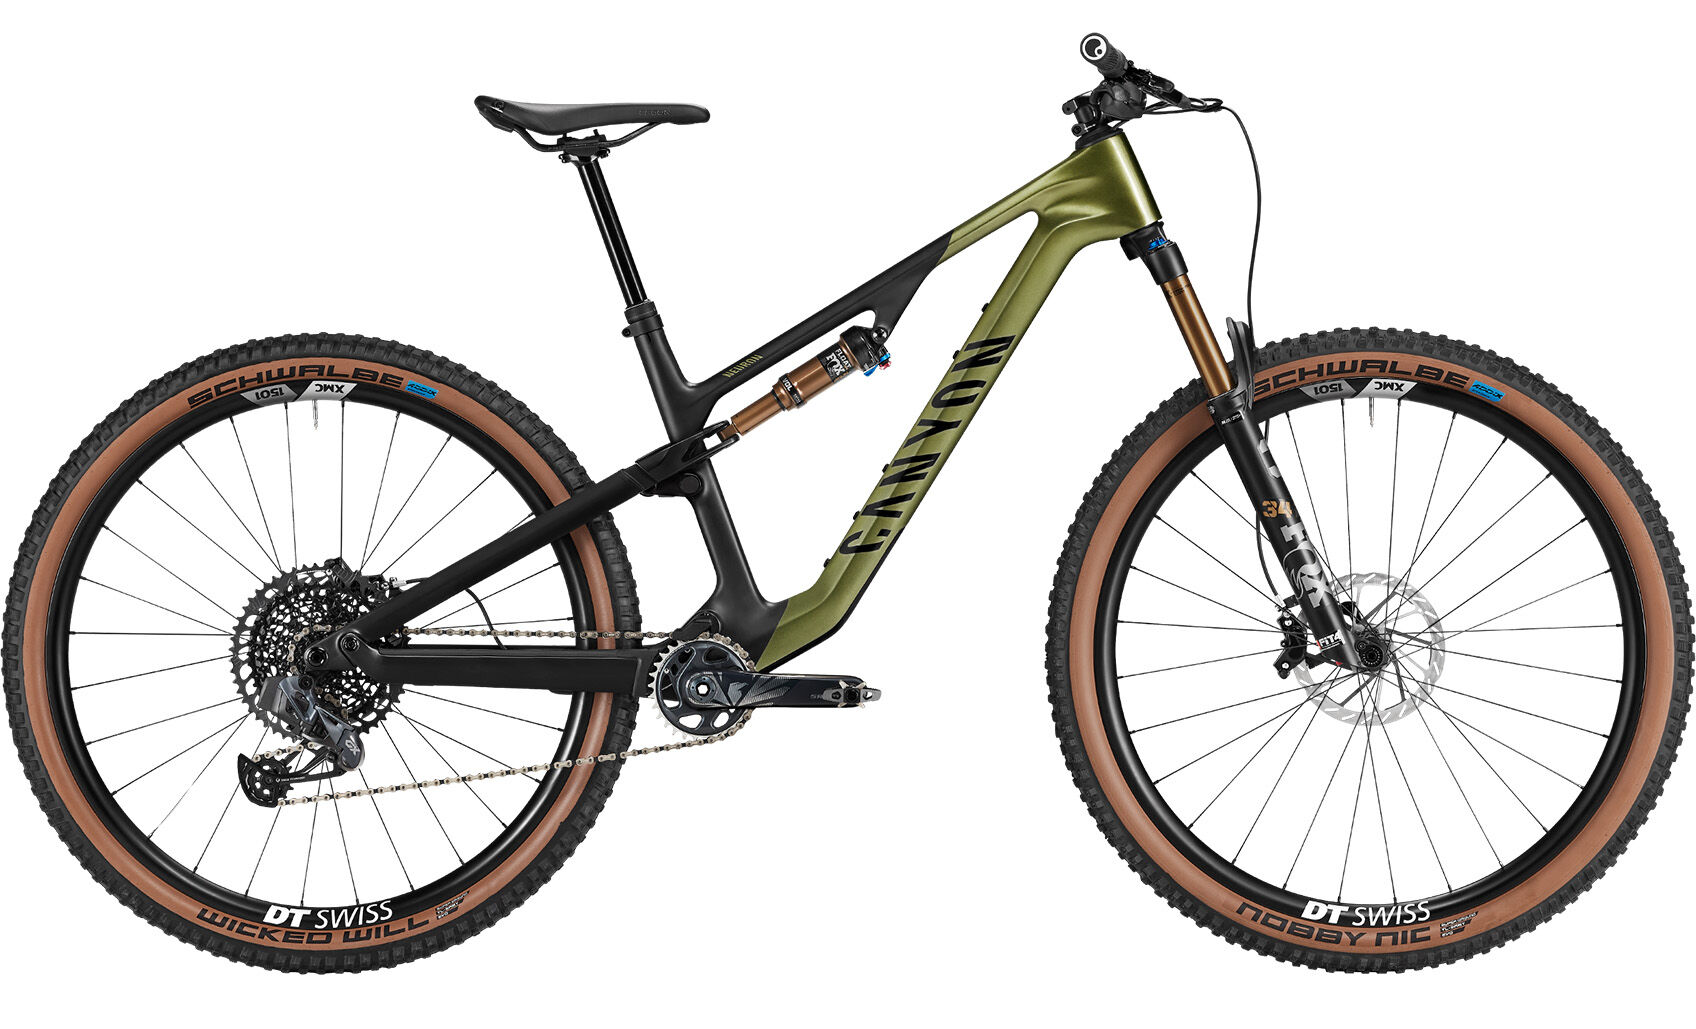 Neuron | Lightweight and Durable Trail Bike | CANYON US